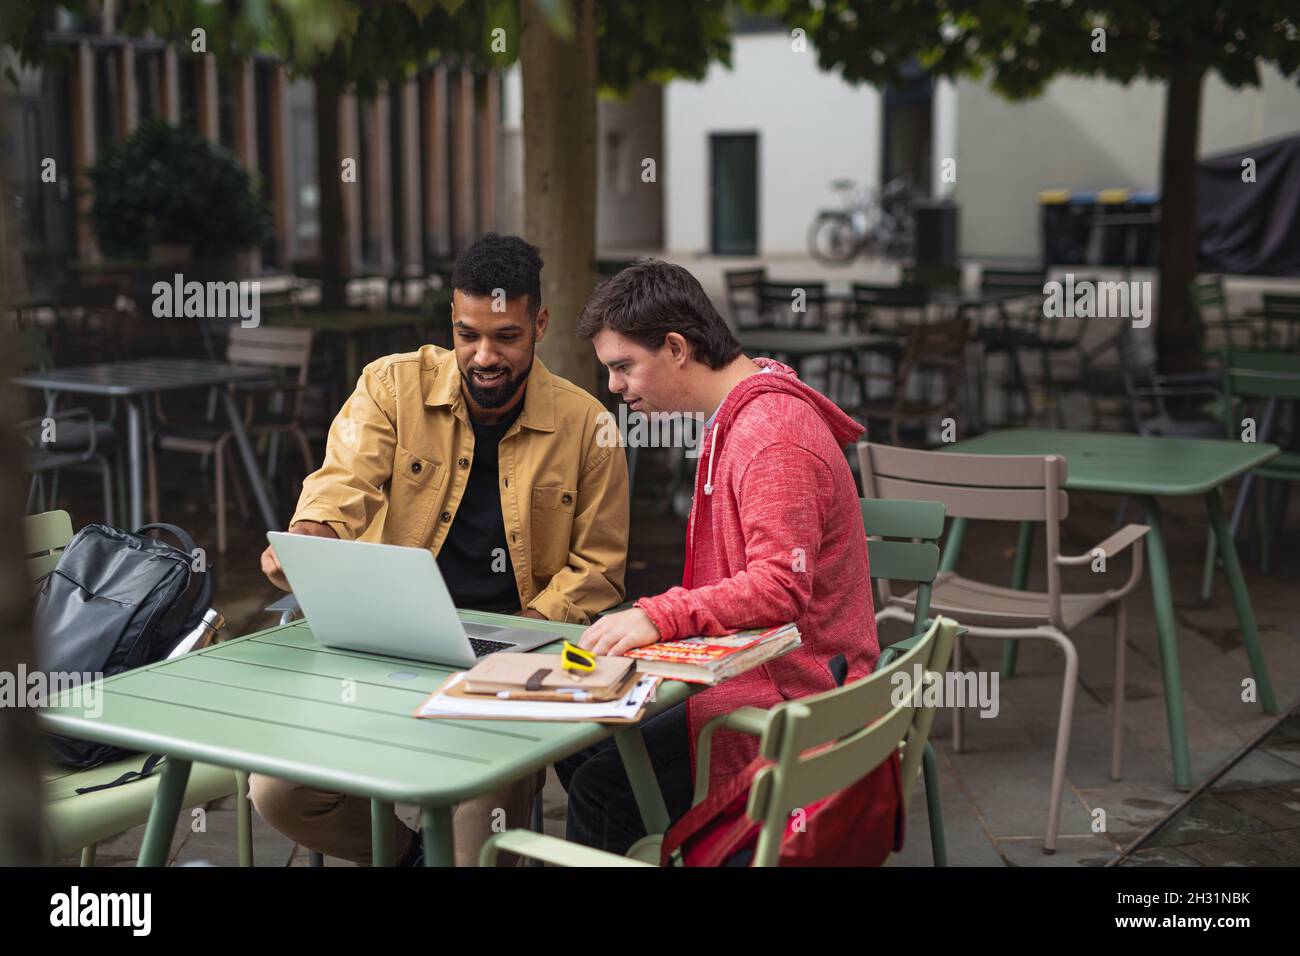 Young man with Down syndrome with his mentoring friend sitting outdoors in cafe using laptop. Stock Photo